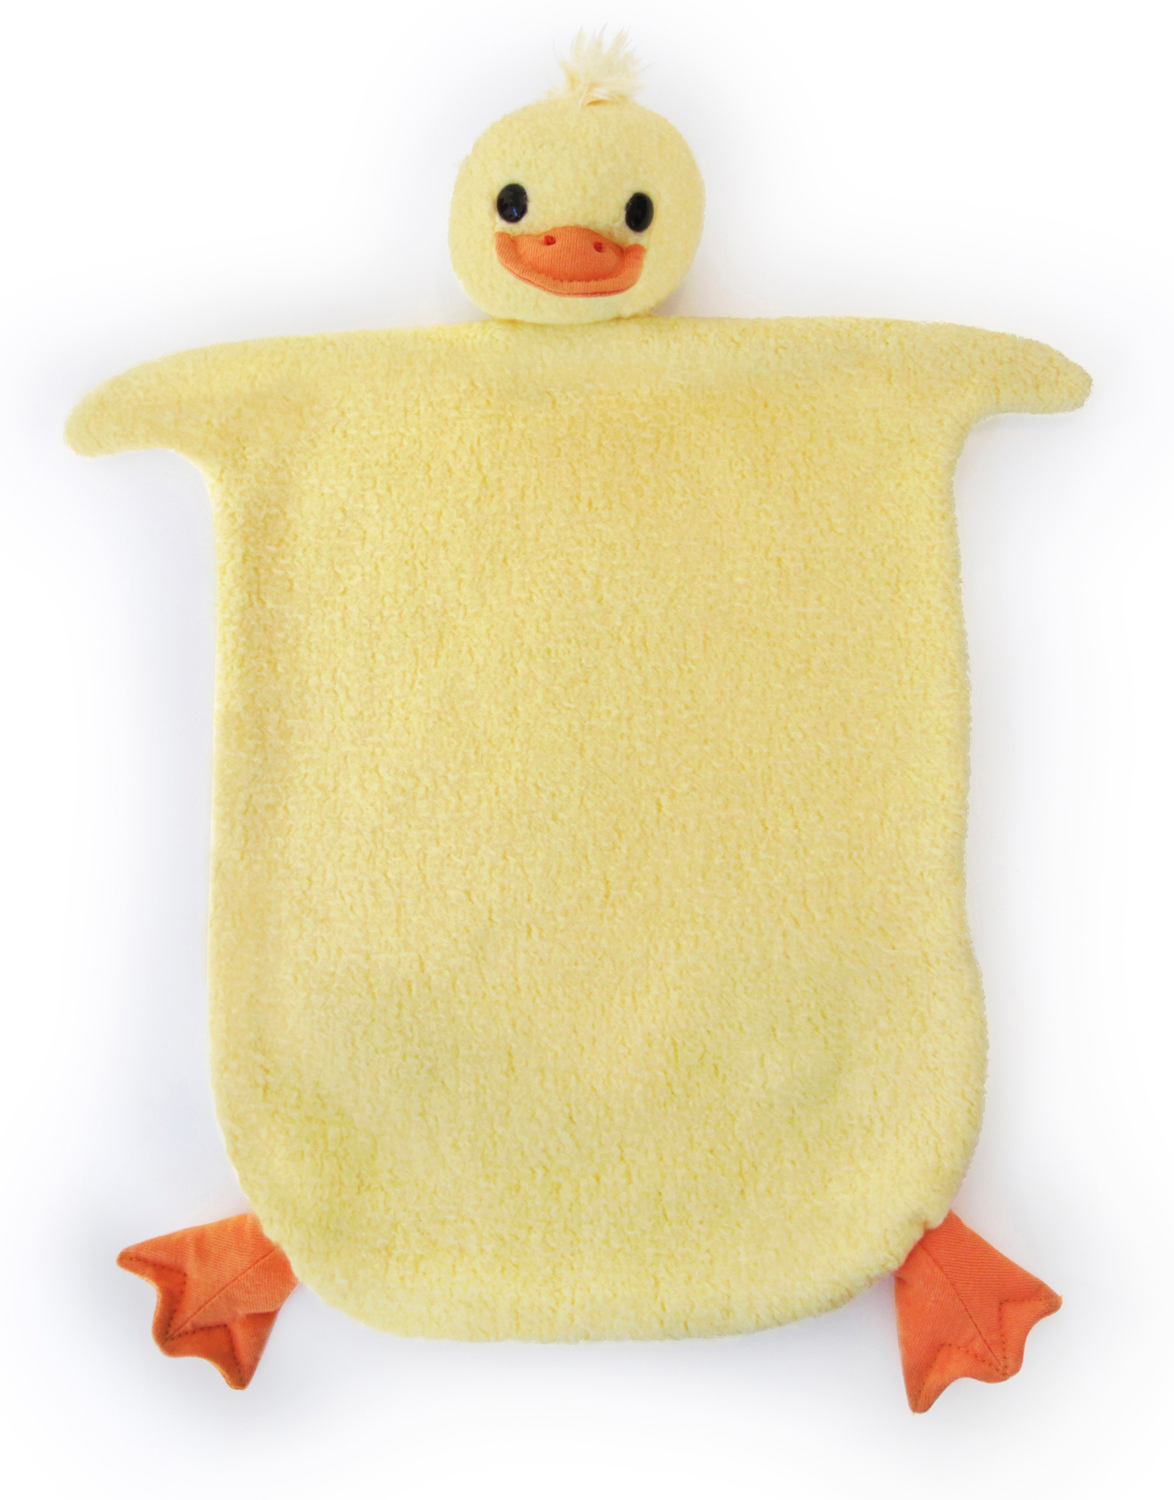 Picnic Pal Blankie - Ducky (in box)